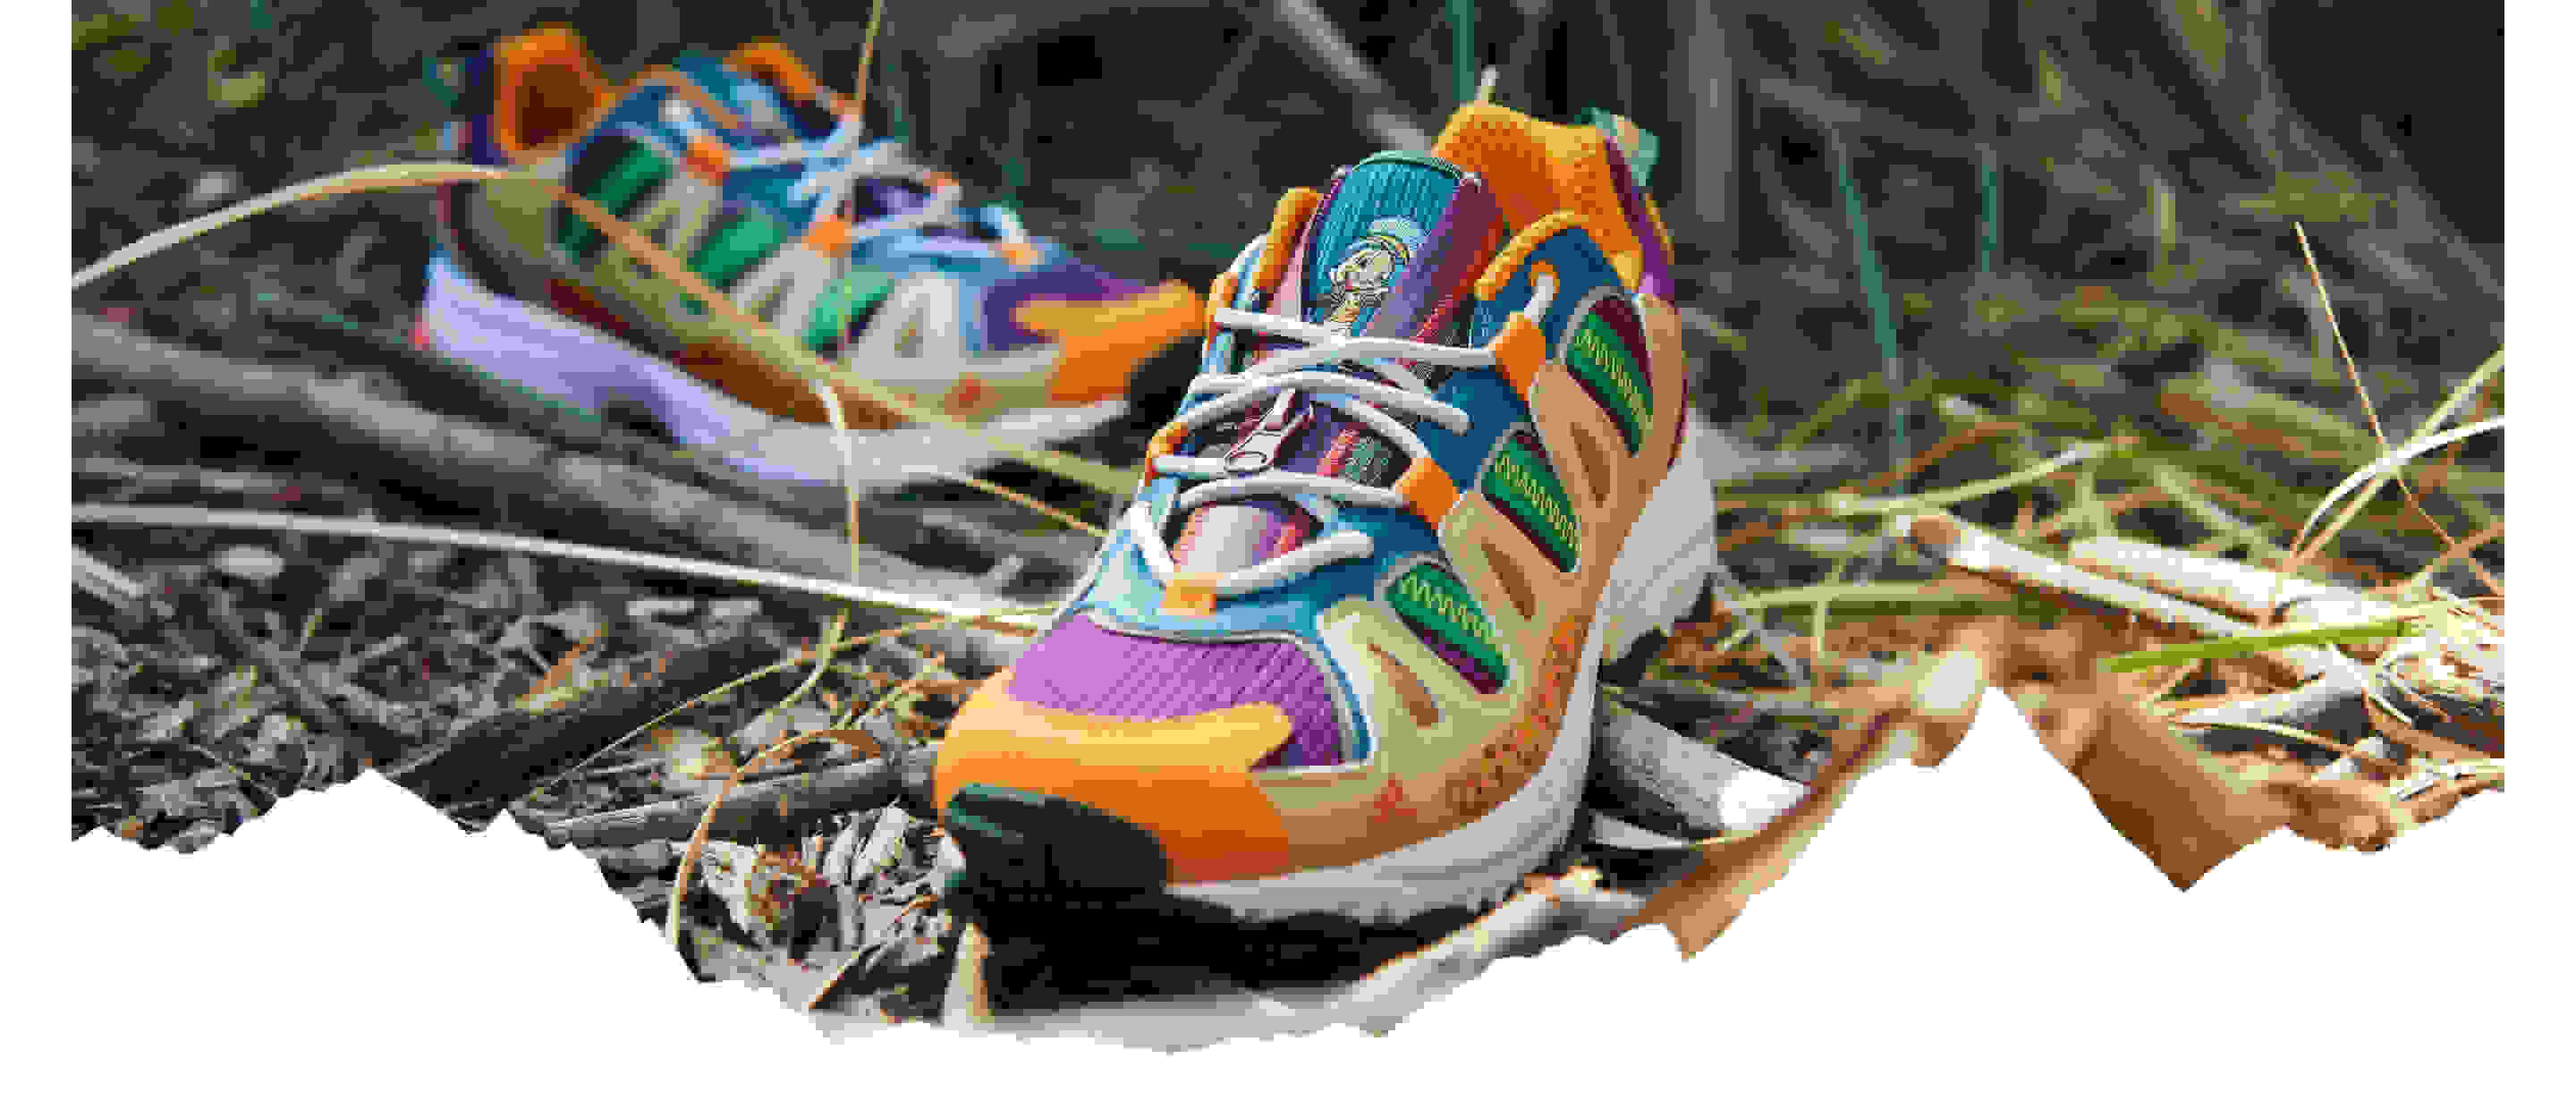 A pair of colourful Superturf Adventure sneakers on the ground, covered with sticks, branches and grass.